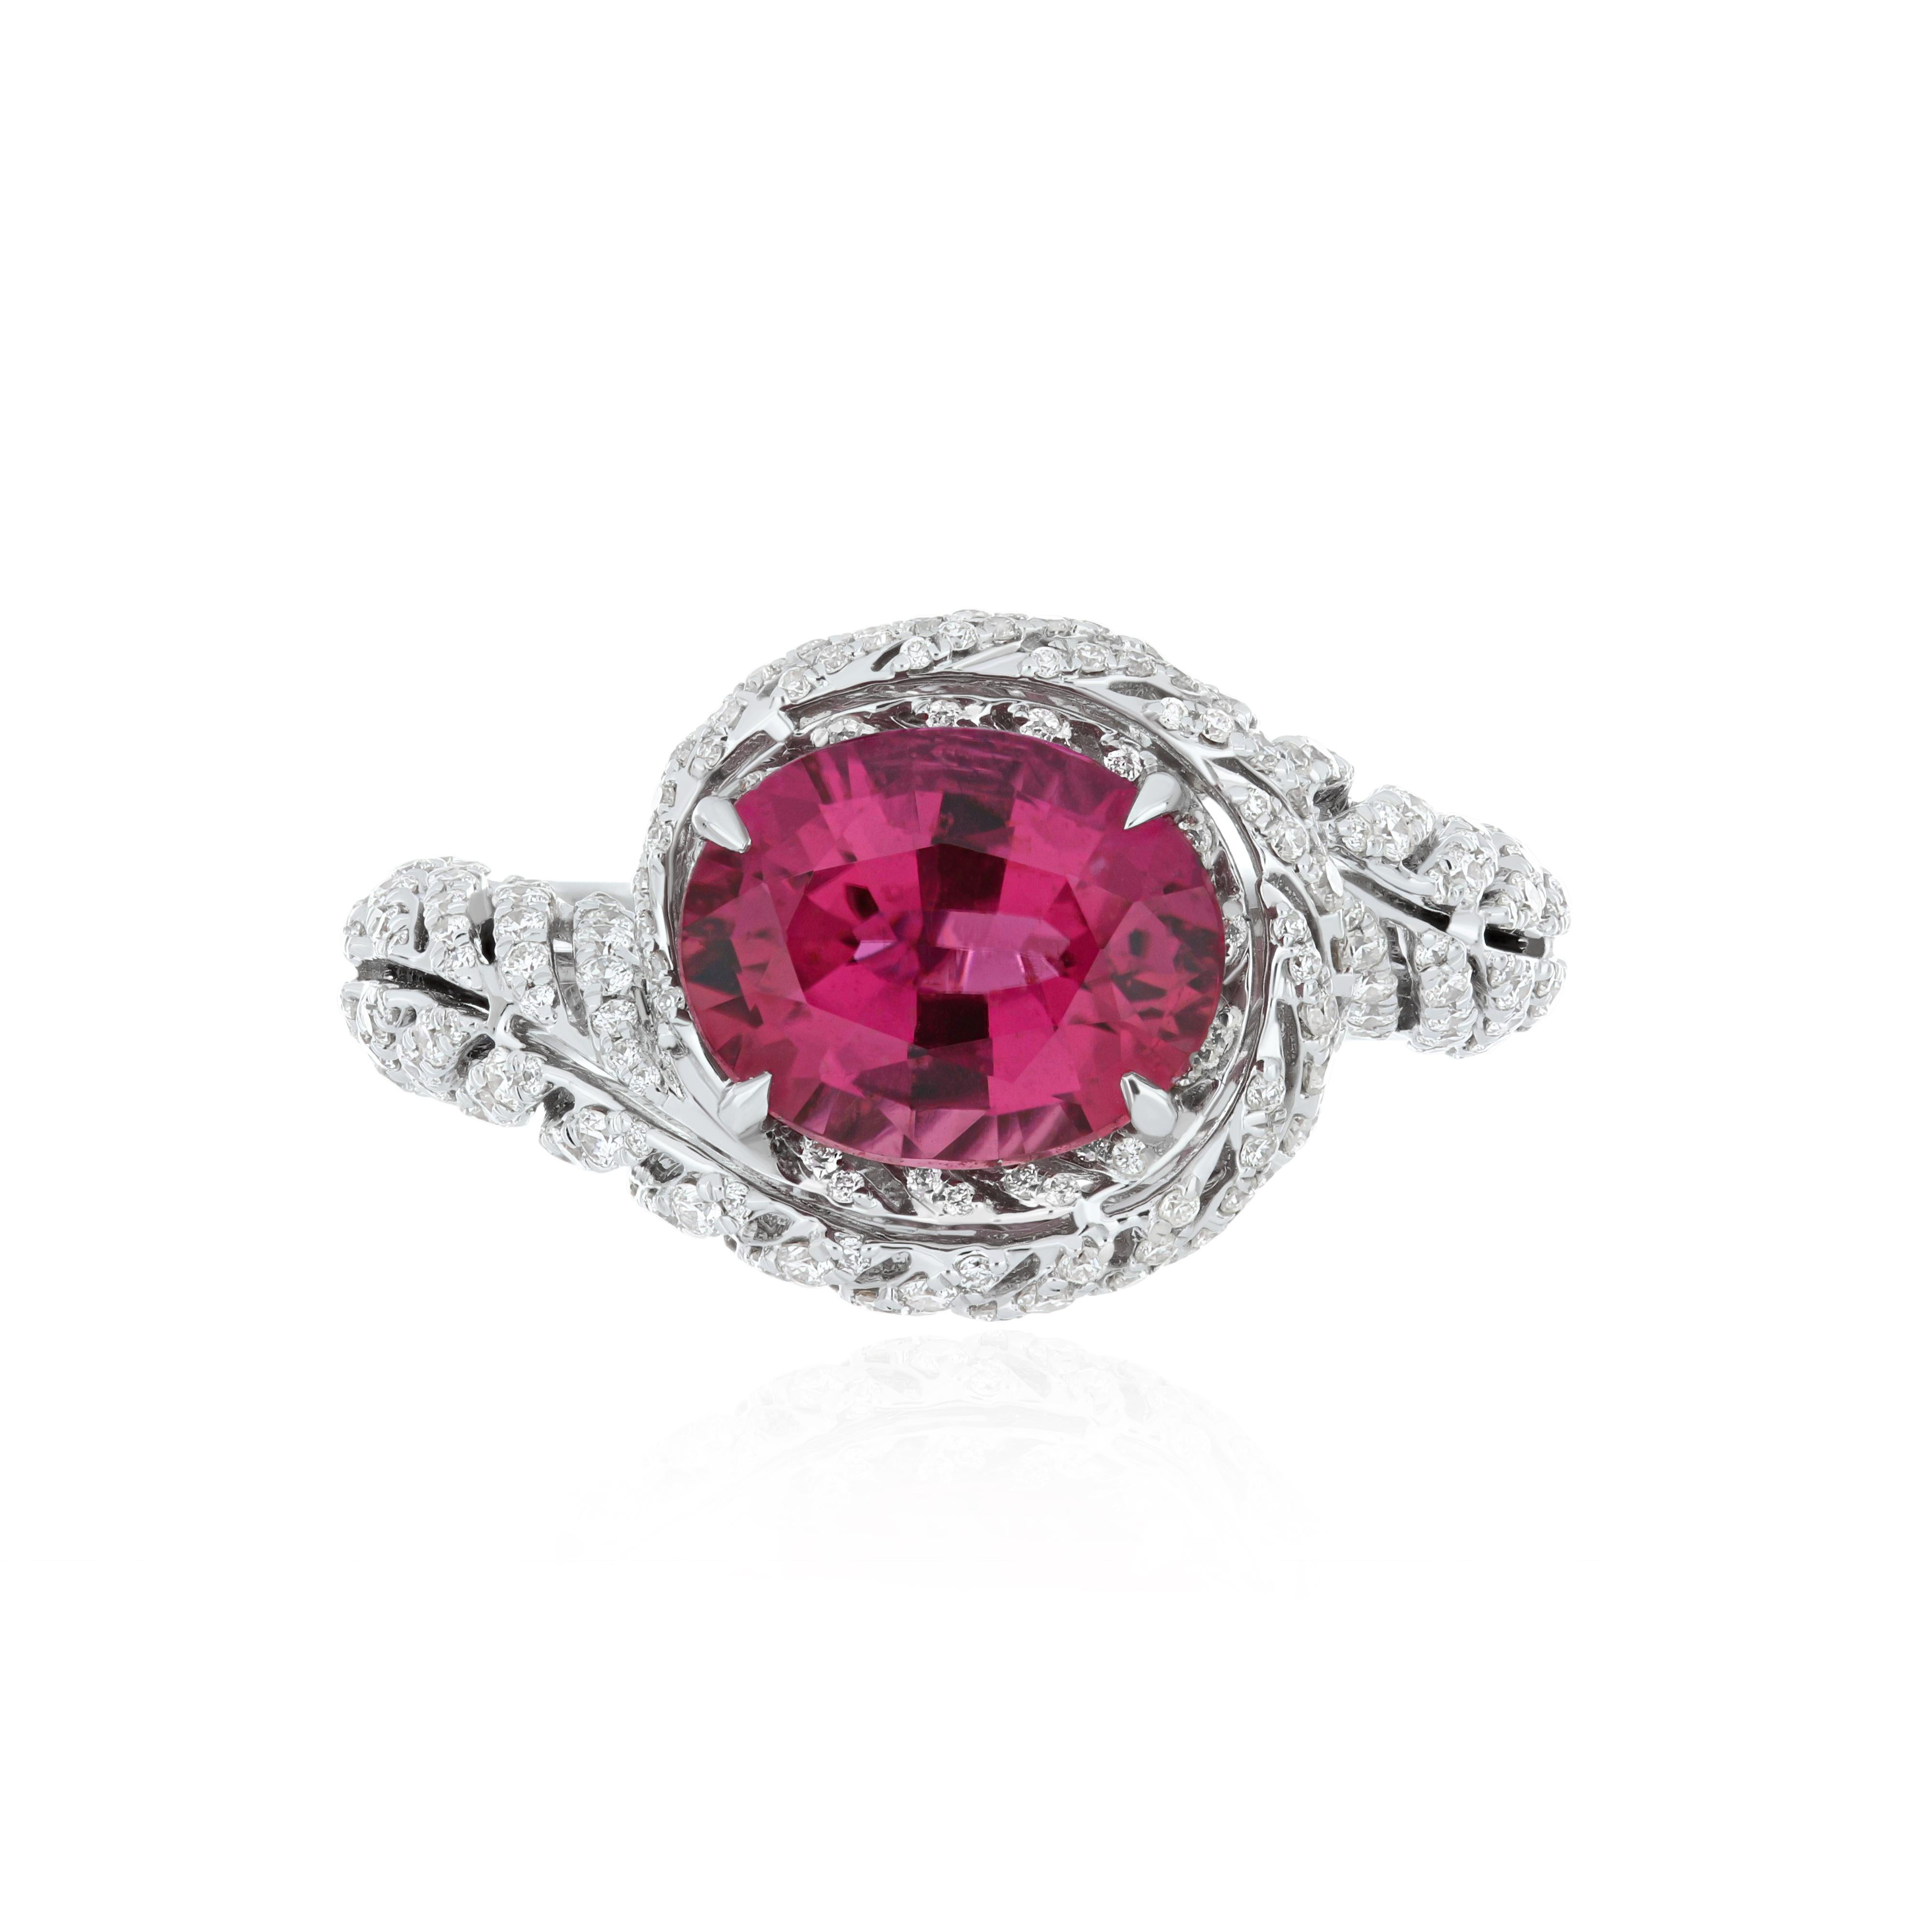 Elegant and exquisitely detailed 18K White Gold Ring, with 3.20 Cts Oval Shape Rubellite set in center and Surrounded by Micro pave Diamonds, weighing approx. 0.98 CT's. total carat weight and Ring to further enhance the beauty of the ring.